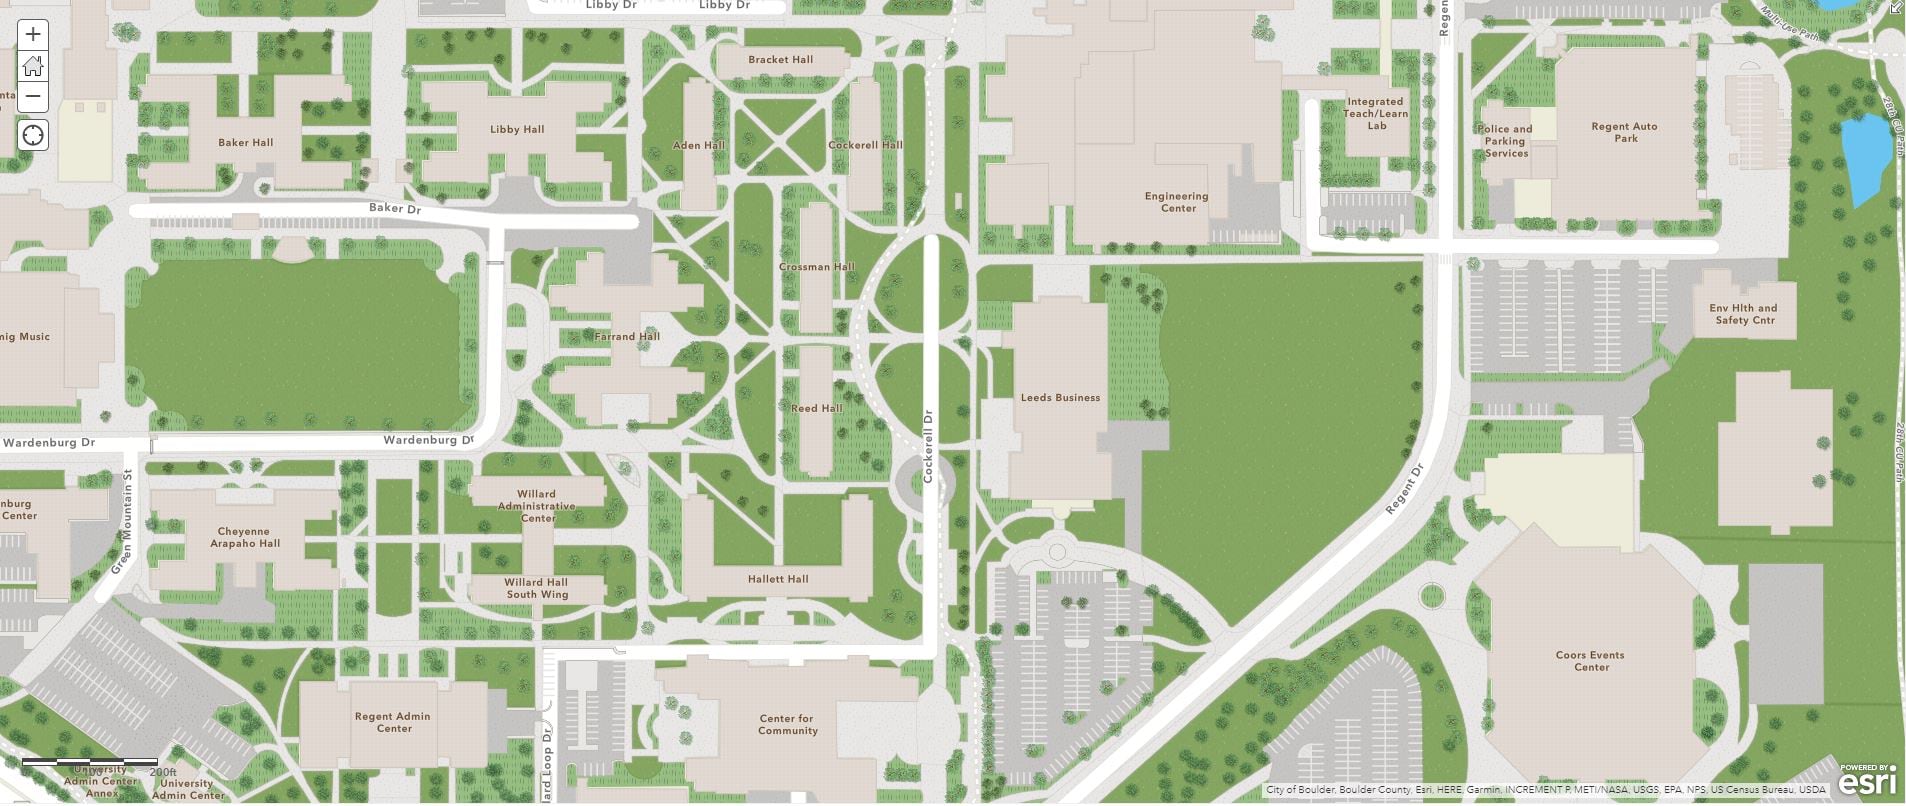 Community Maps Contributors Update Basemaps and Imagery in ArcGIS Online